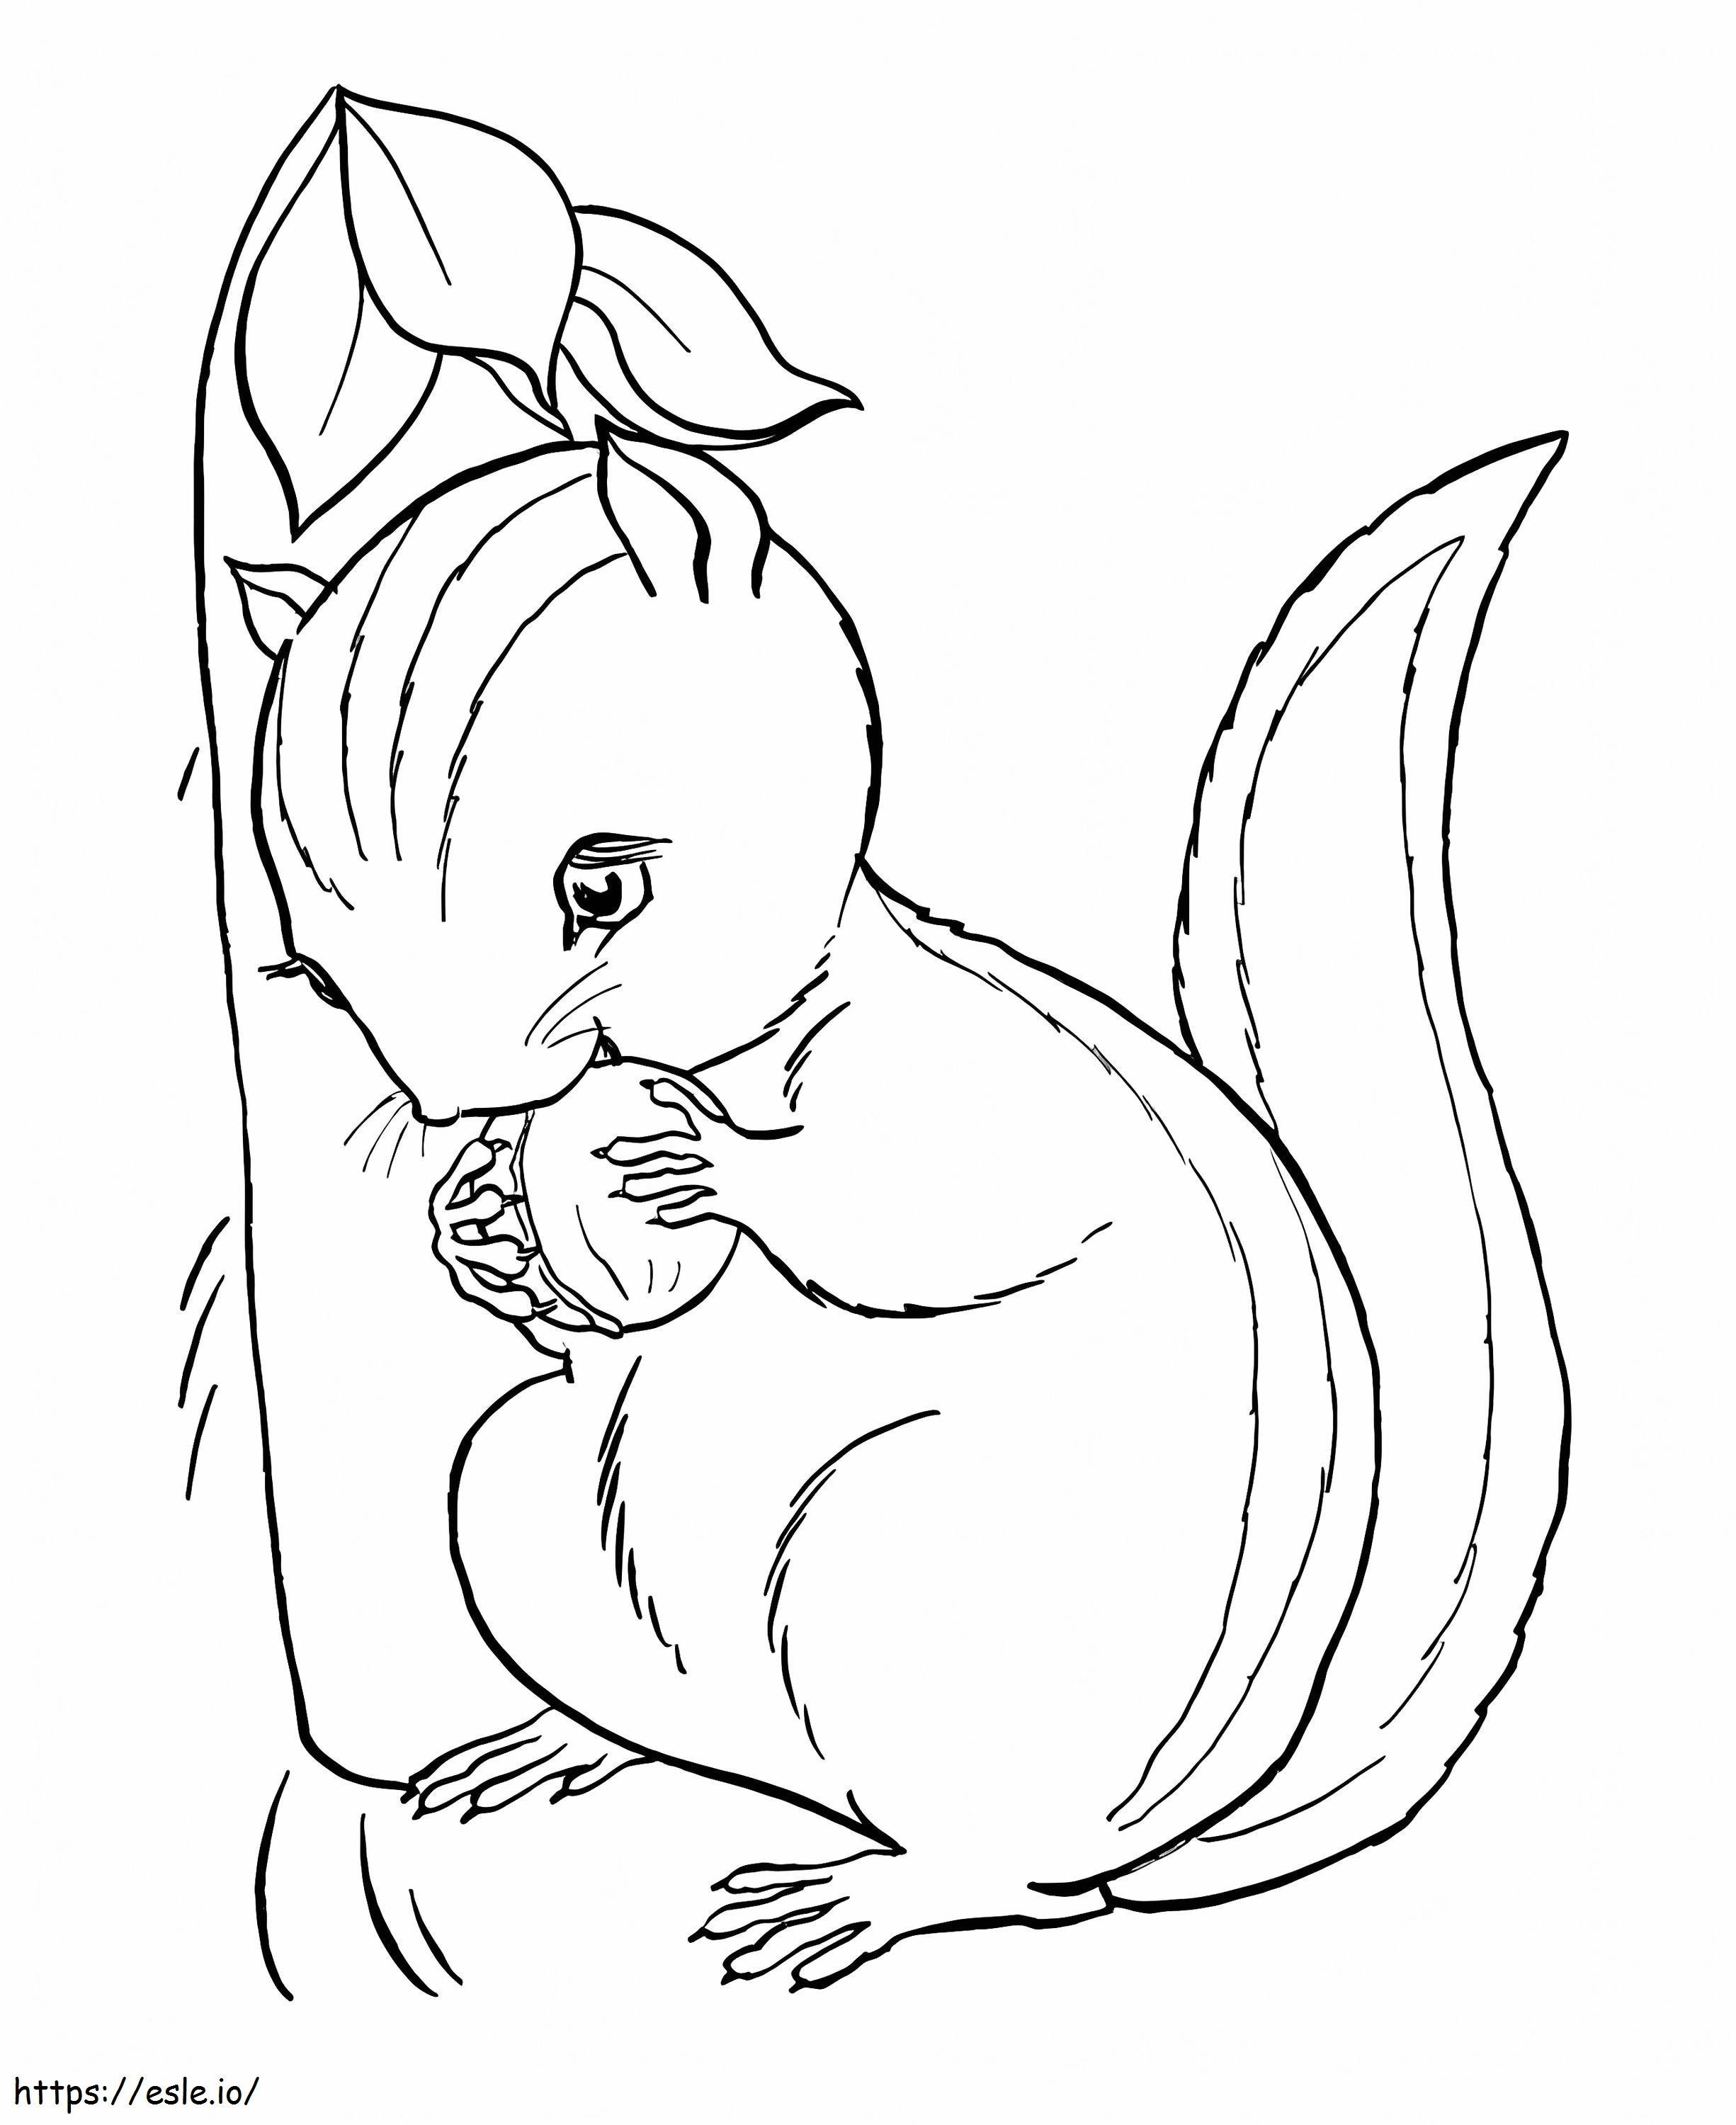 Lovely Chipmunk coloring page